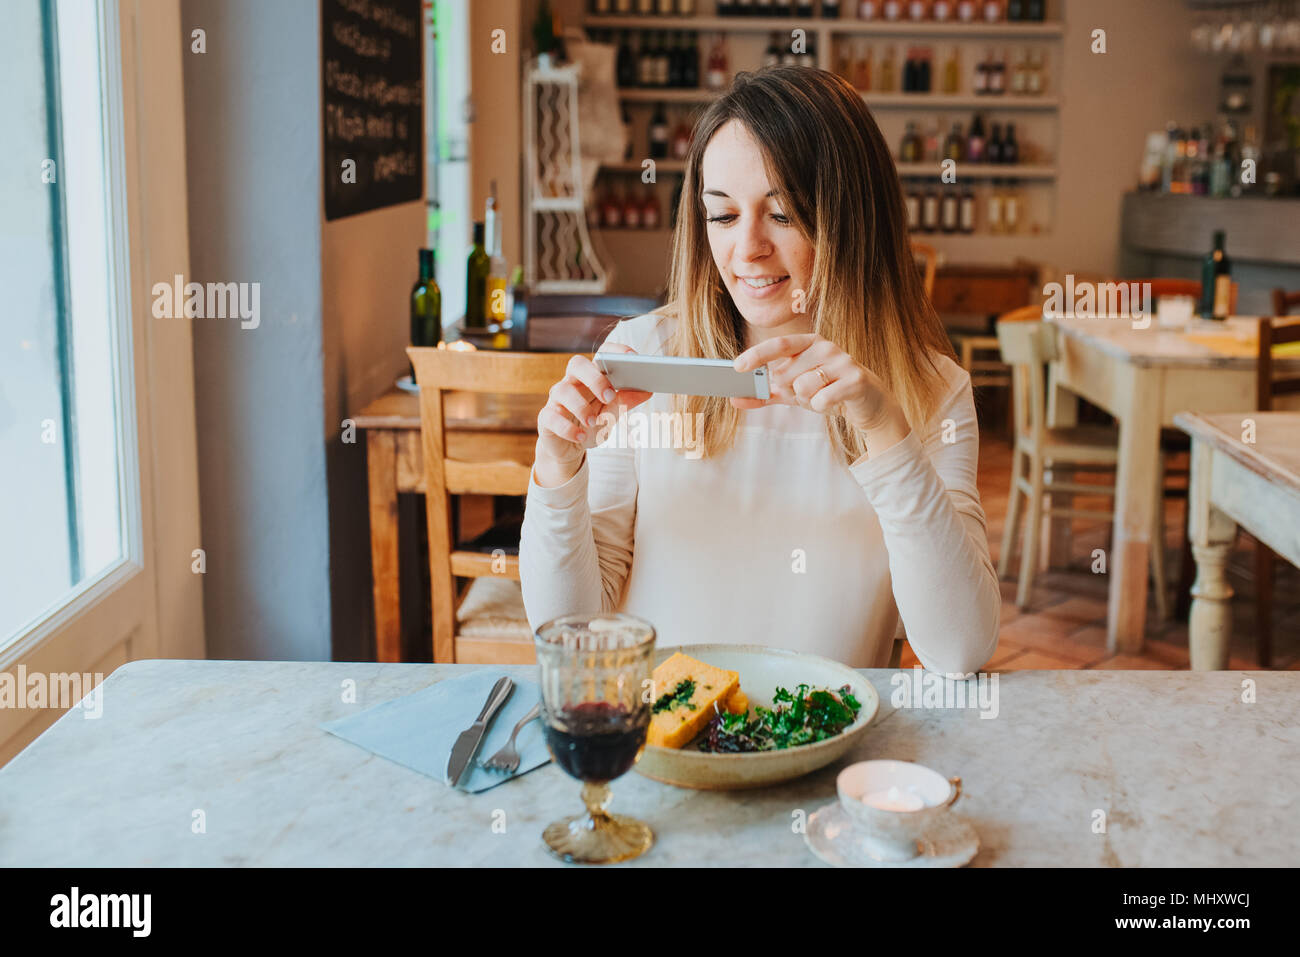 Woman taking photo of vegan meal in restaurant Stock Photo